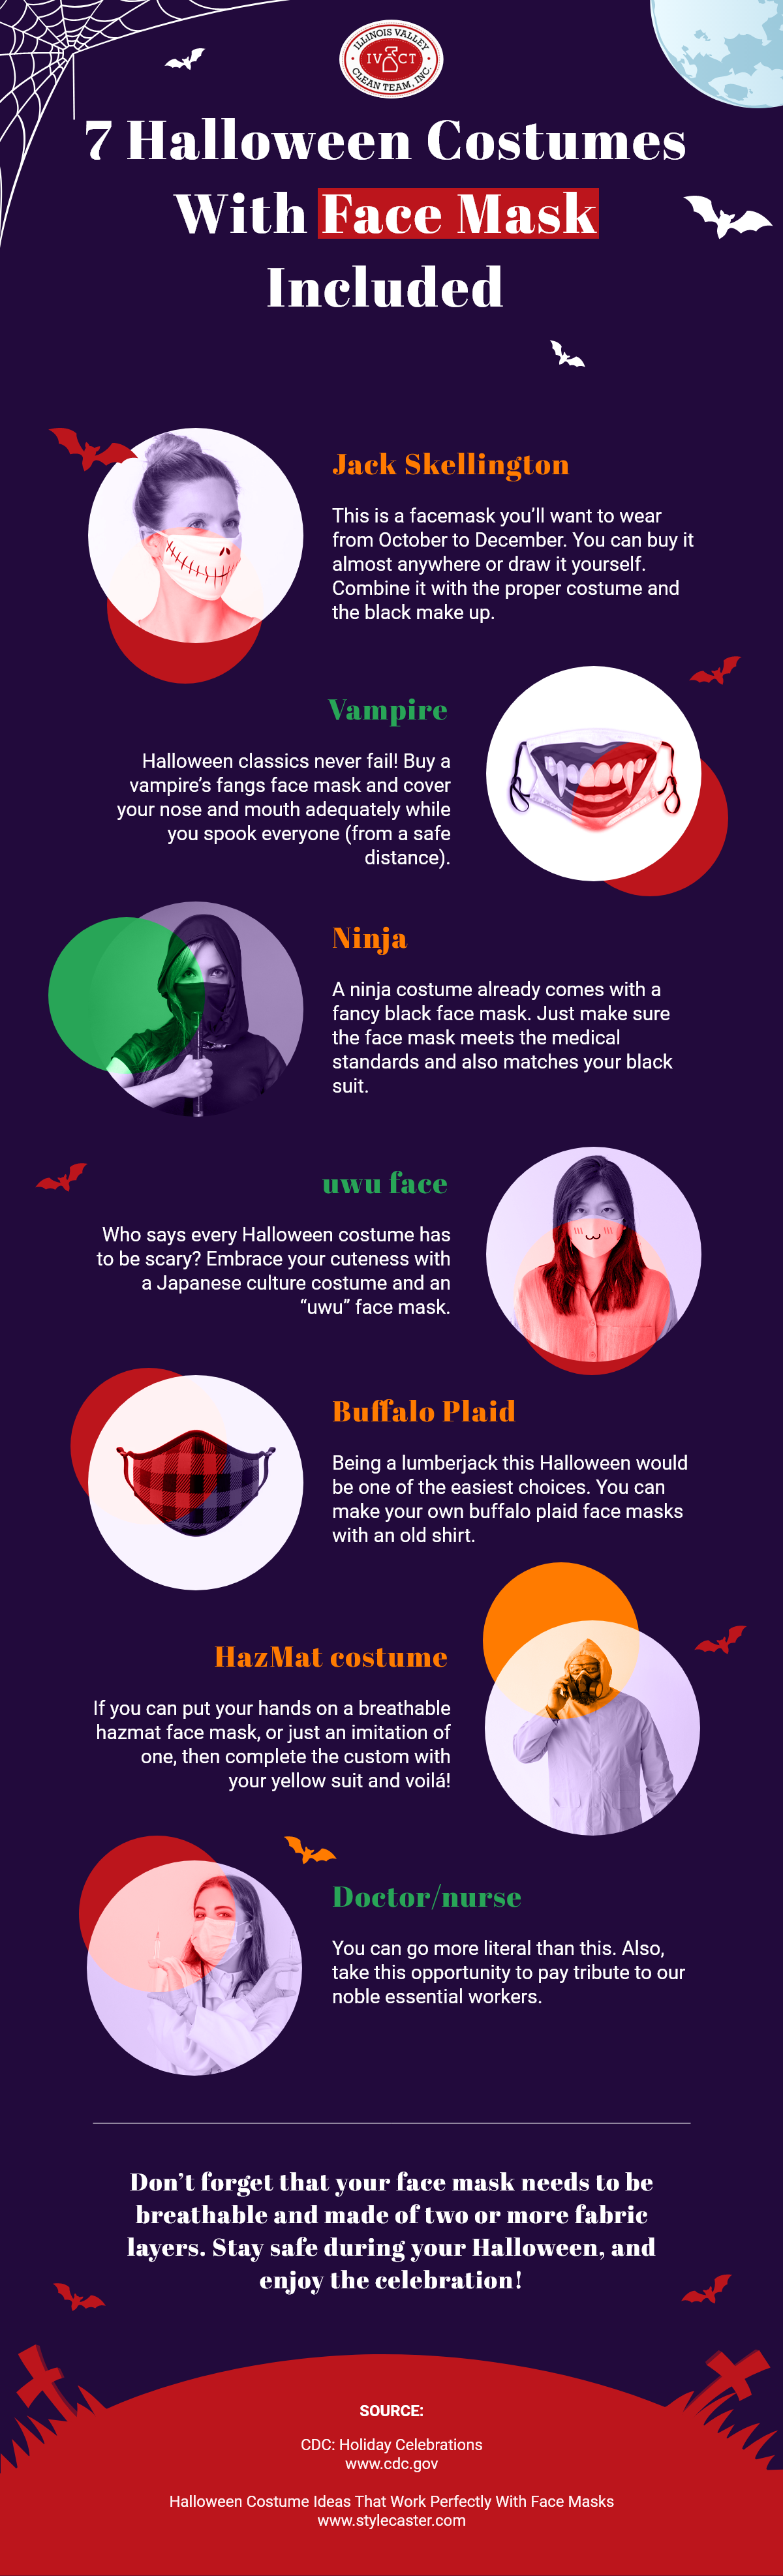 7 Halloween Costumes With Face Mask Included